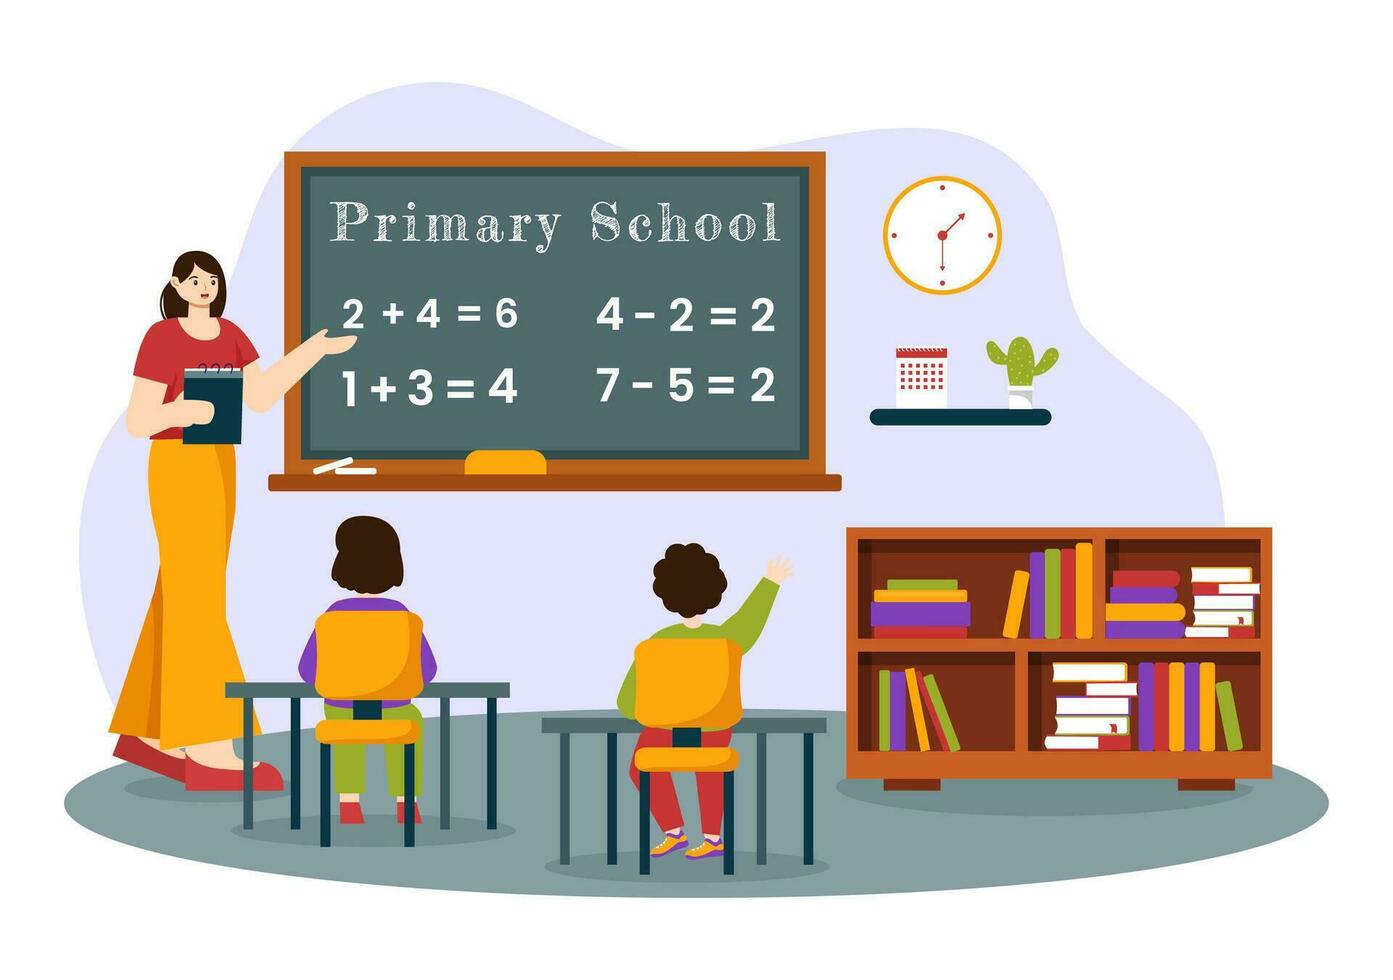 Primary School Vector Illustration of Students Children and School Building with The Concept of Learning and Knowledge in Flat Cartoon Background